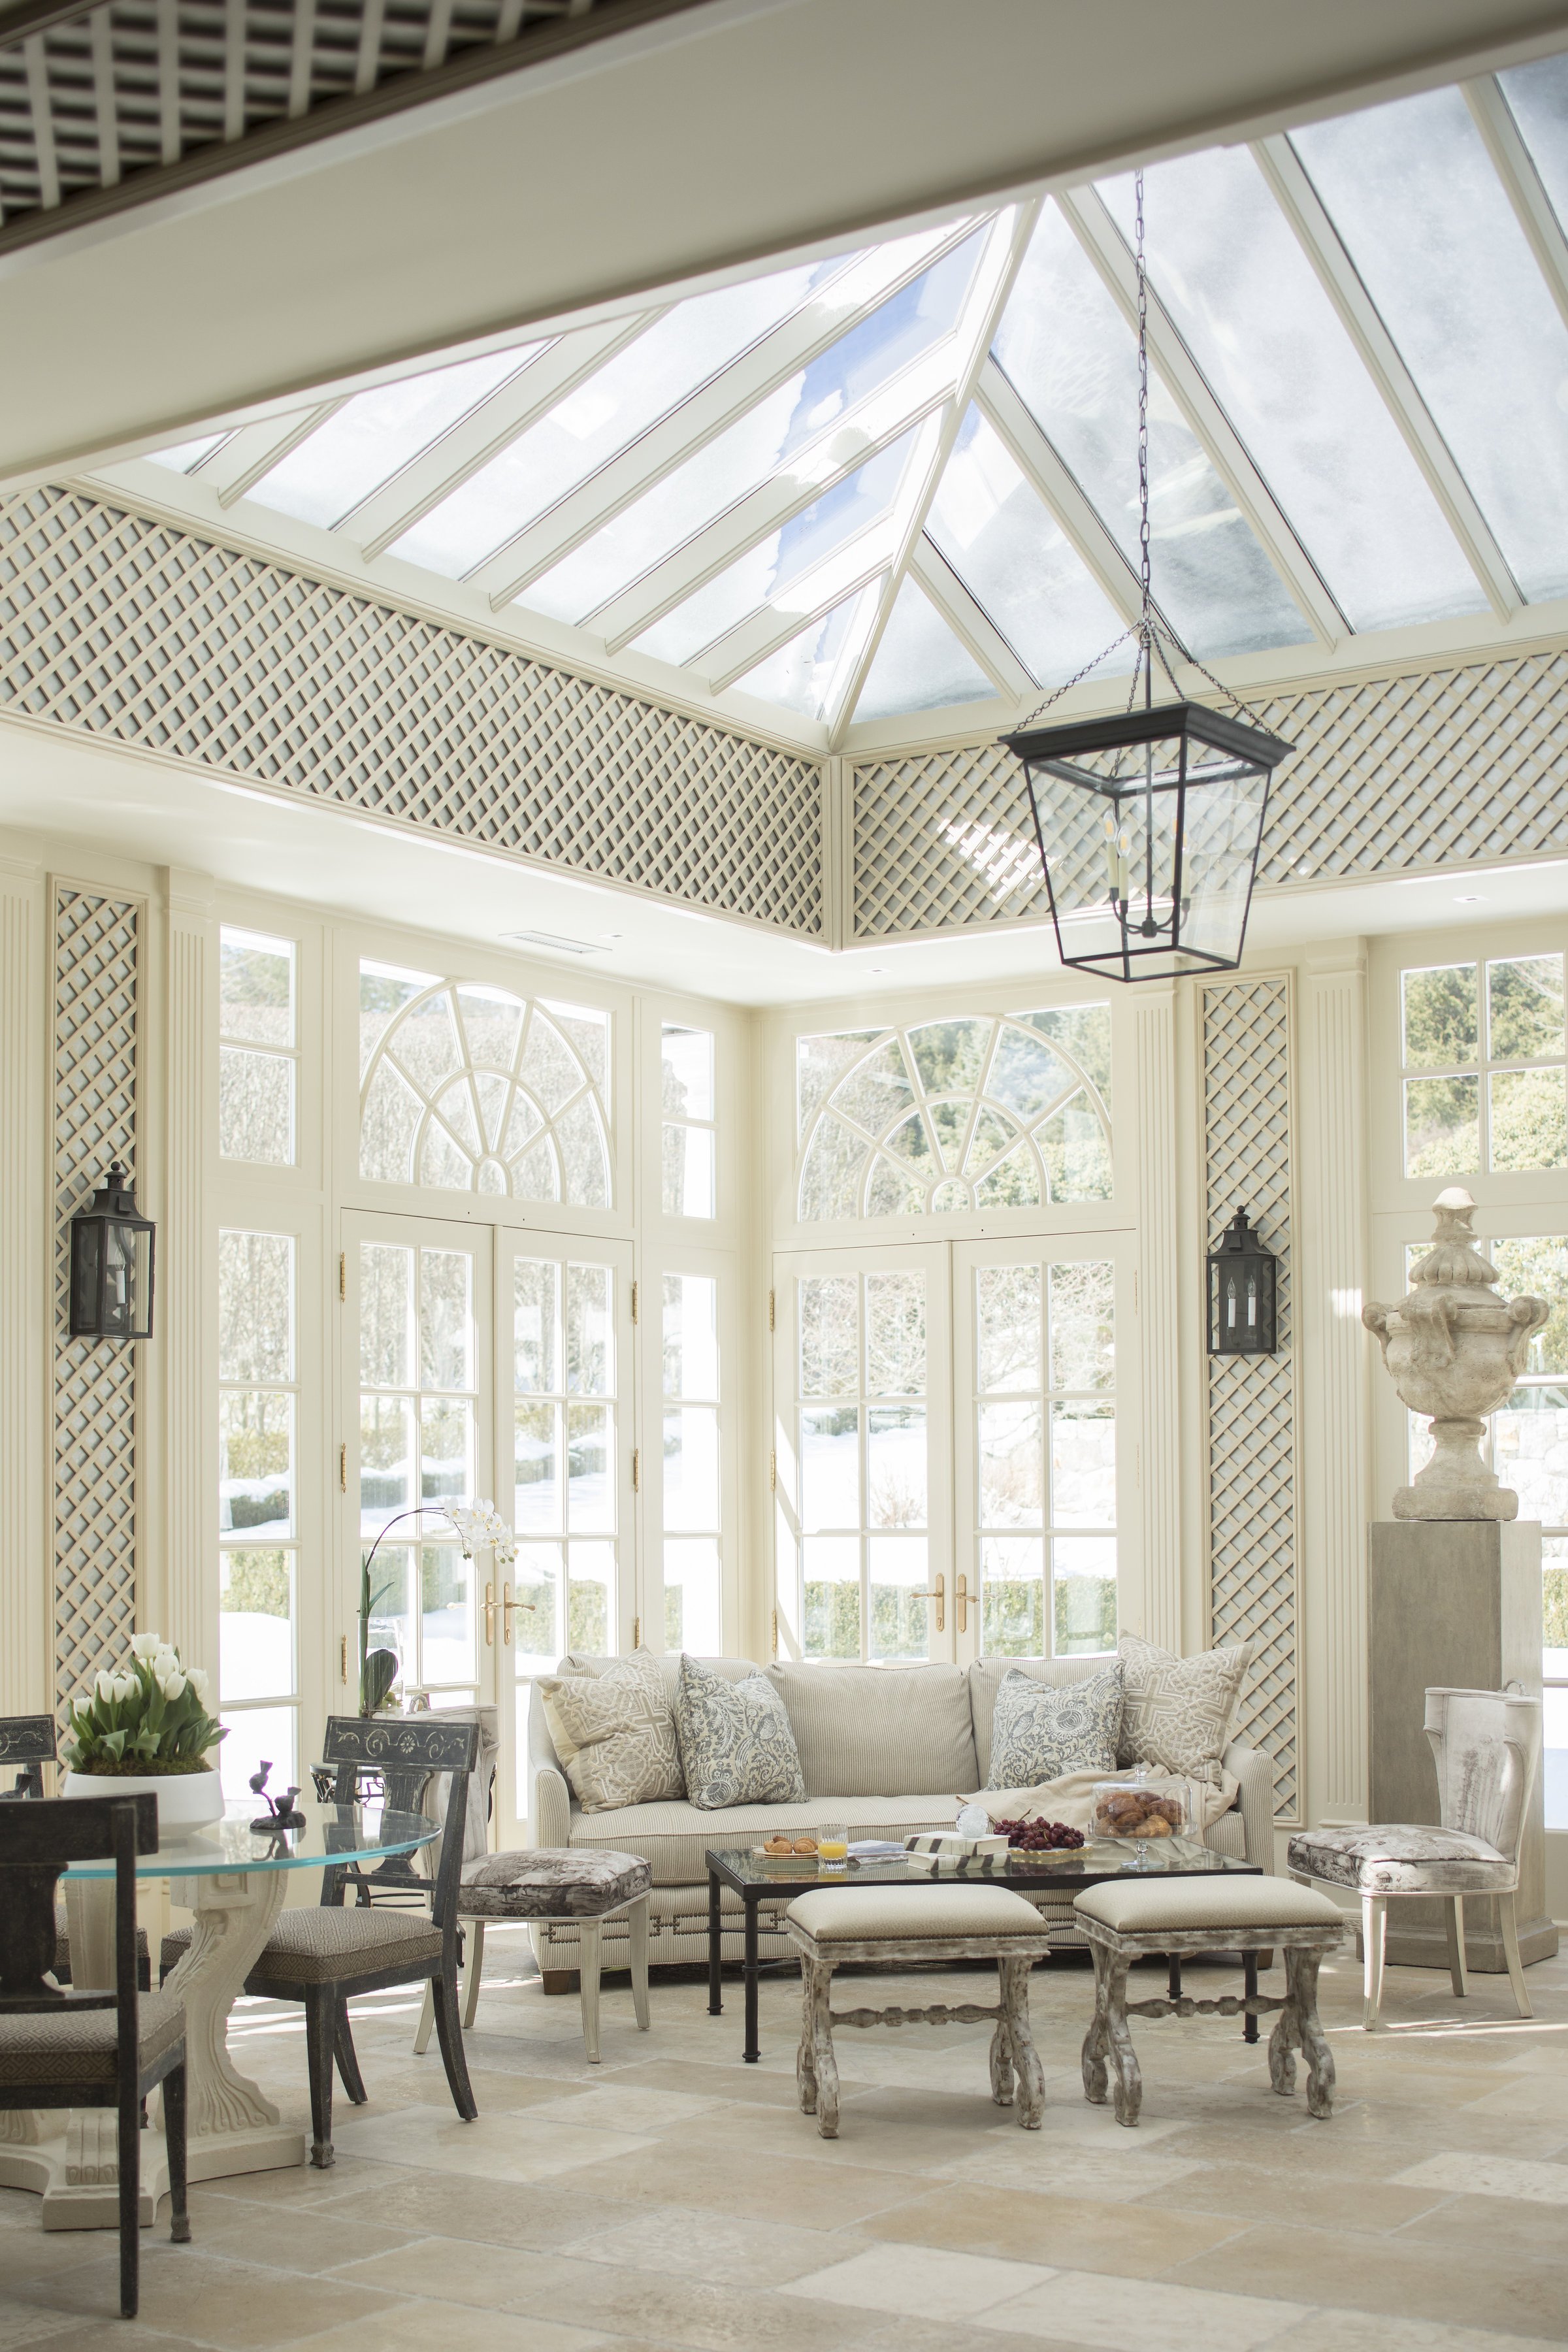 87-vaulted-ceiling-open-lantern-sconce-elegant-couch-windows--rinfret-neoclassical-greenwich-connecticut.JPG